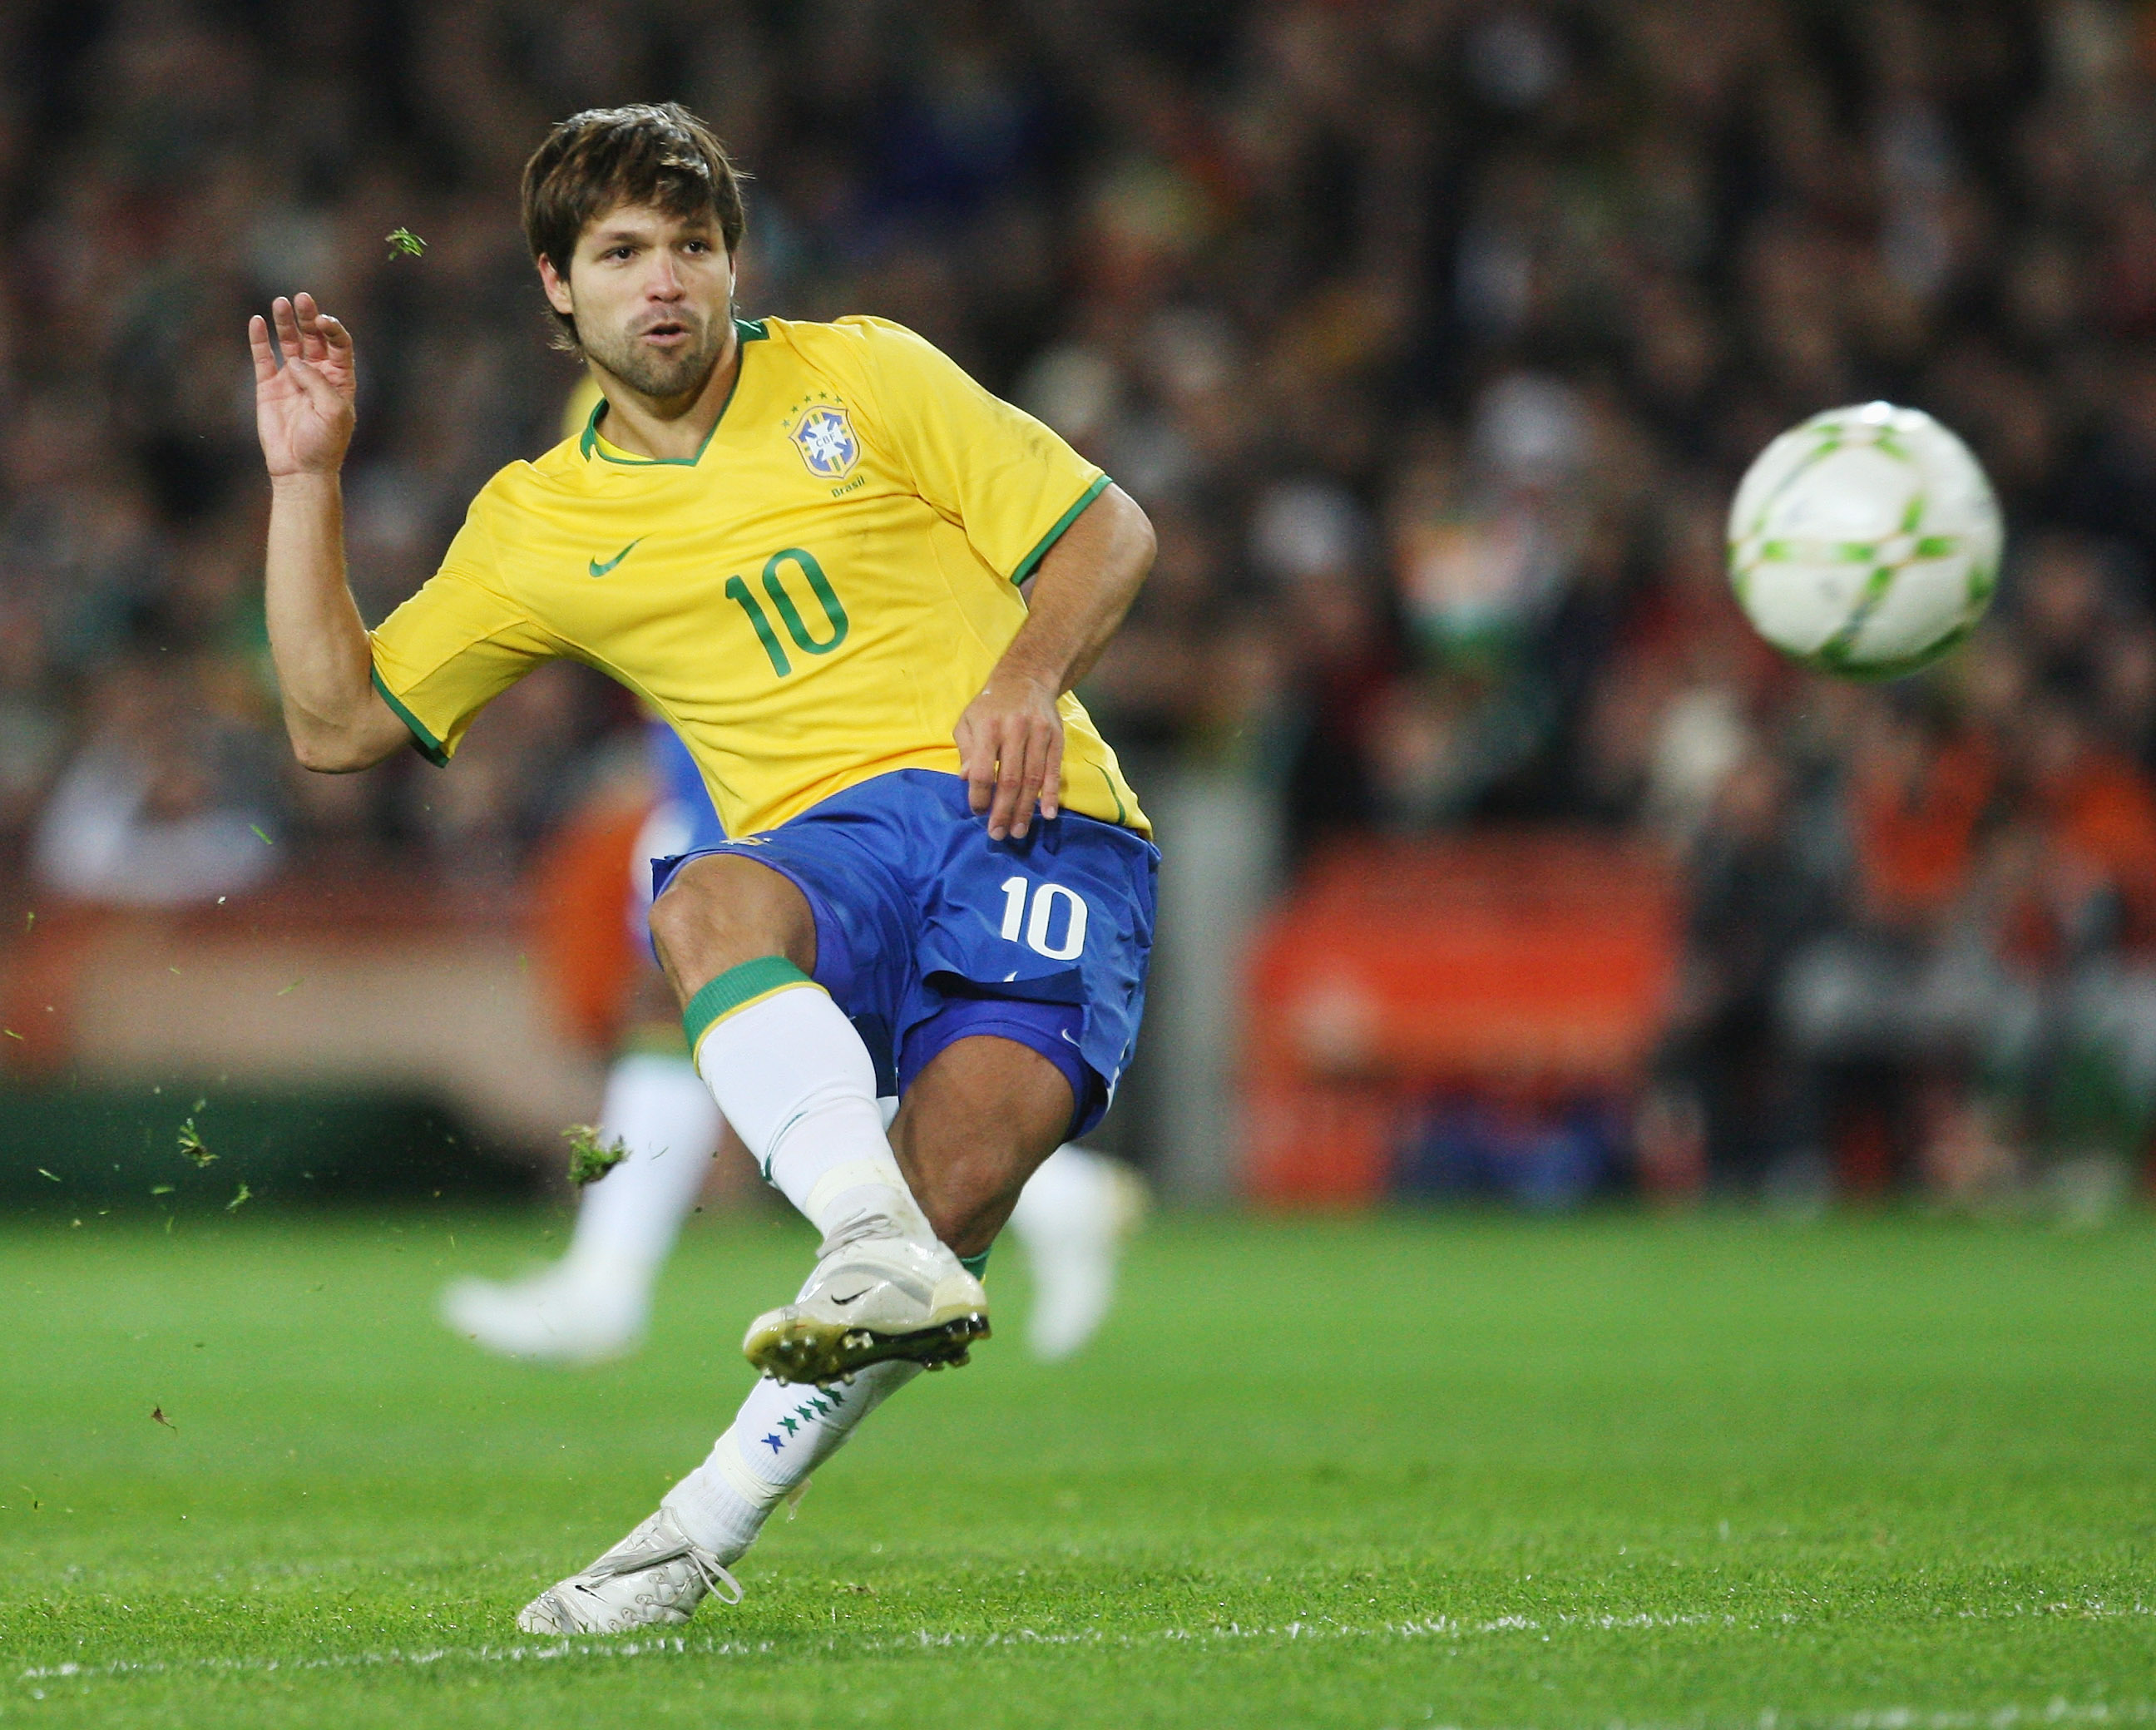 Diego Ribas in action for Brazil against Ireland in February 2008.